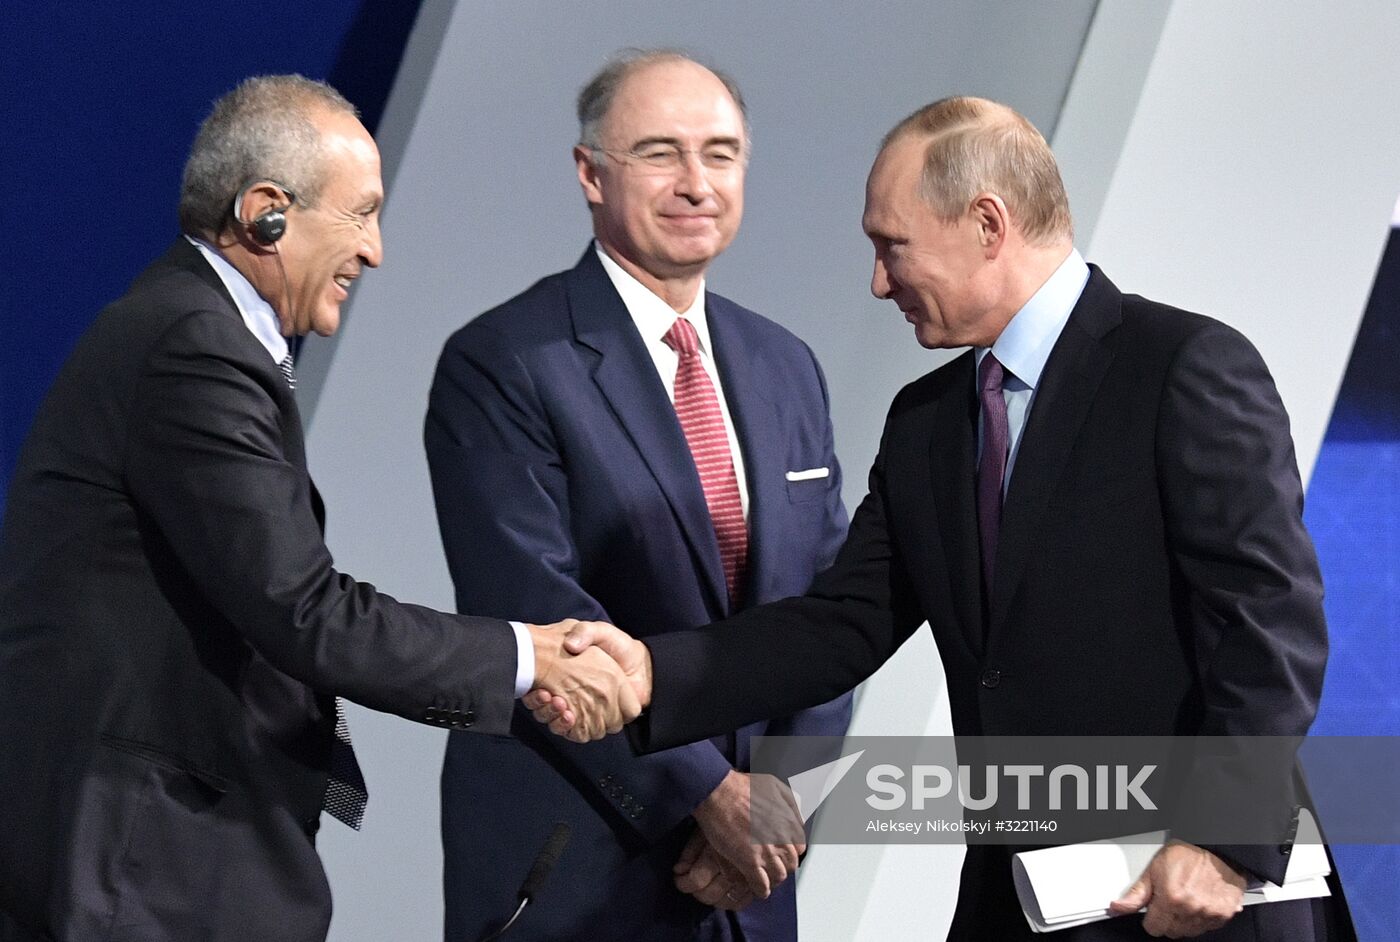 President Vladimir Putin at plenary session of the VTB Capital's Russia Calling! investment forum